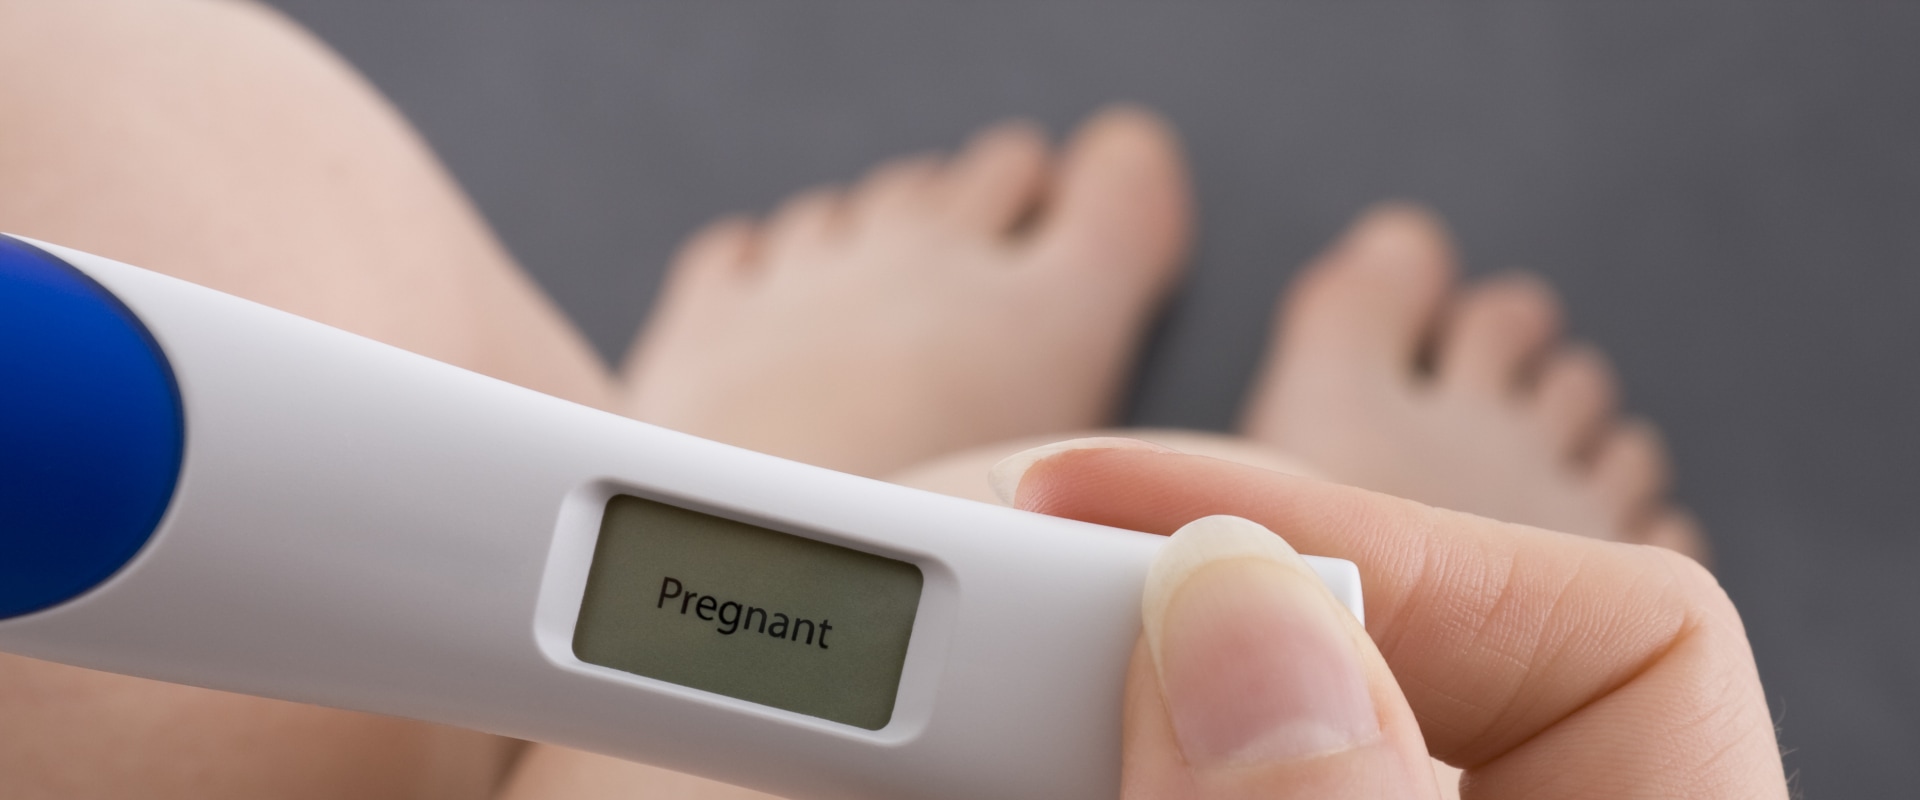 How much hcg is needed for a digital pregnancy test?